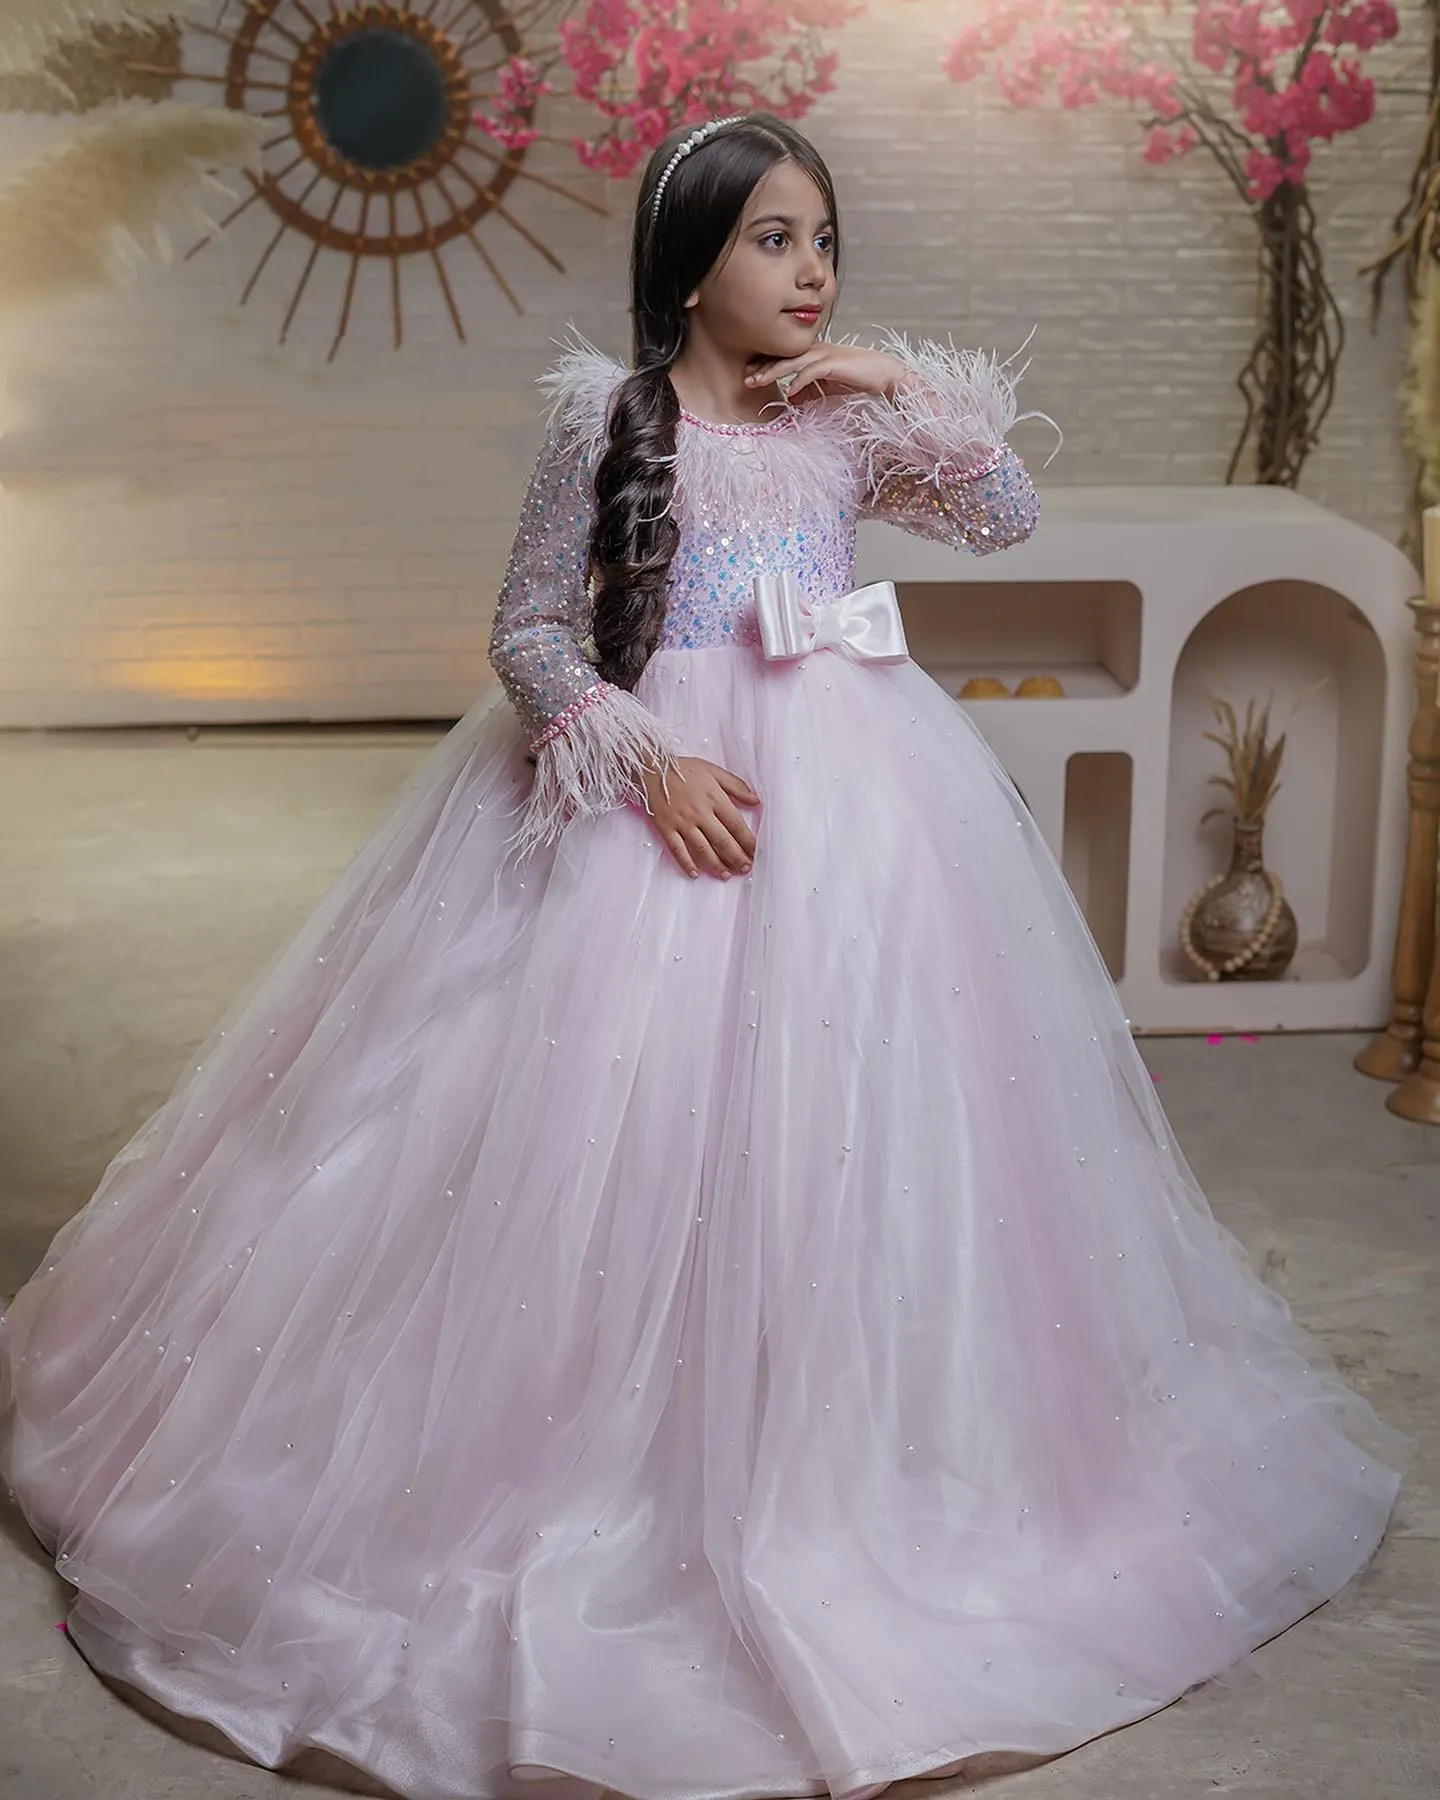 

Blush Pink Feather Flower Girls Dresses For Weddings Sequins Pearls Long Sleeve Birthday Children Dress Girl Pageant Party Gowns